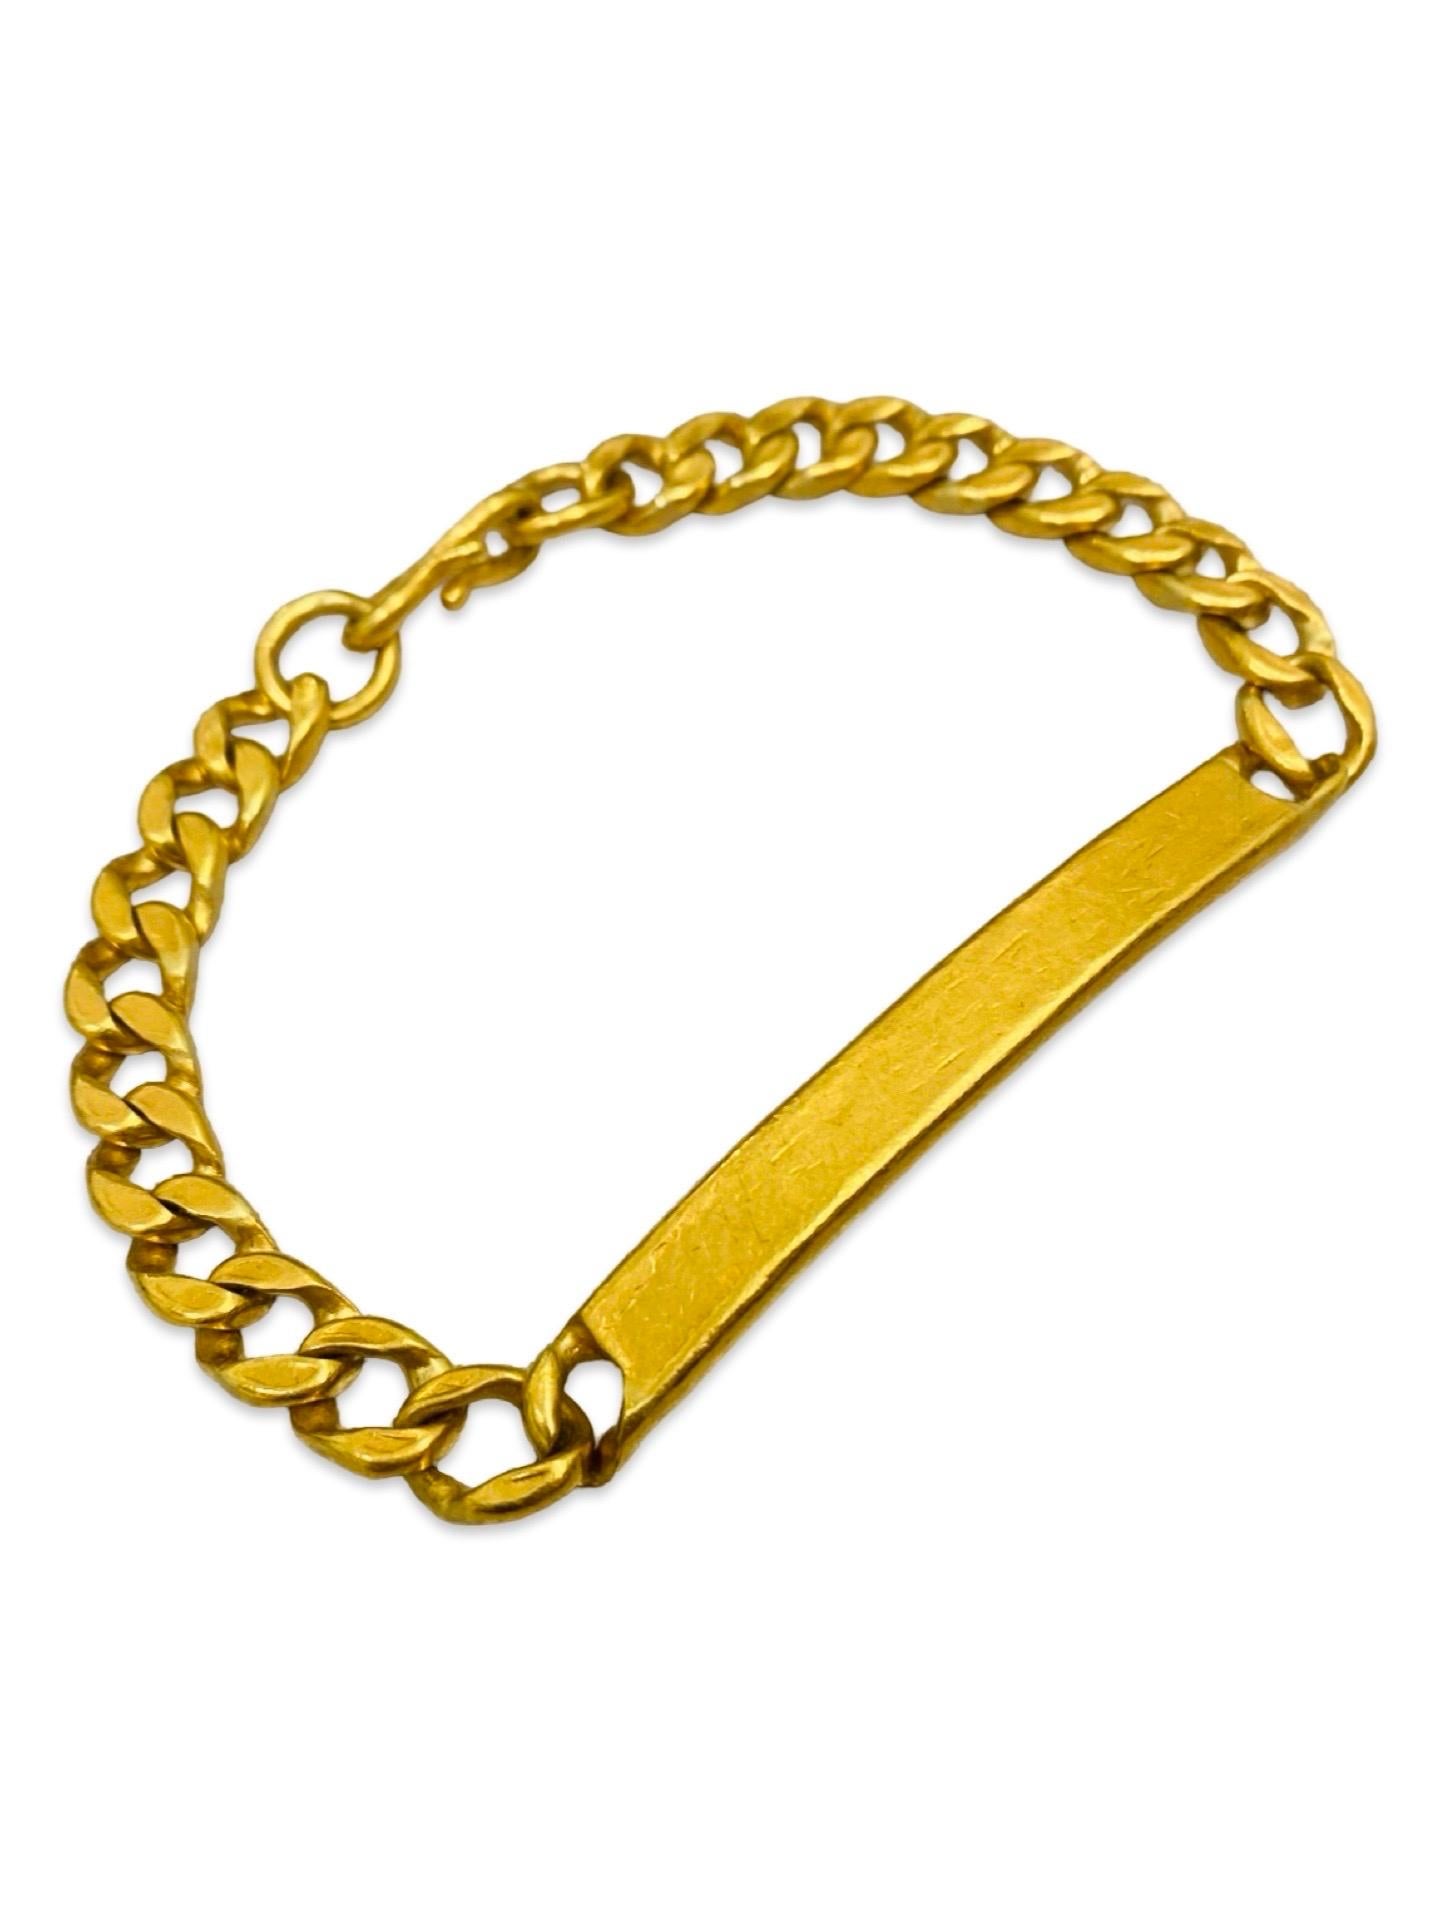 Antique 24k 999.9% 8mm Fancy Boxed Curb Link ID Bracelet. Very elegant and heavy bracelet weighting 53.8g solid gold. The ID center measures 2 inches in length. The bracelet is 8.5 inches in length. Very interesting piece of history. The bracelet is